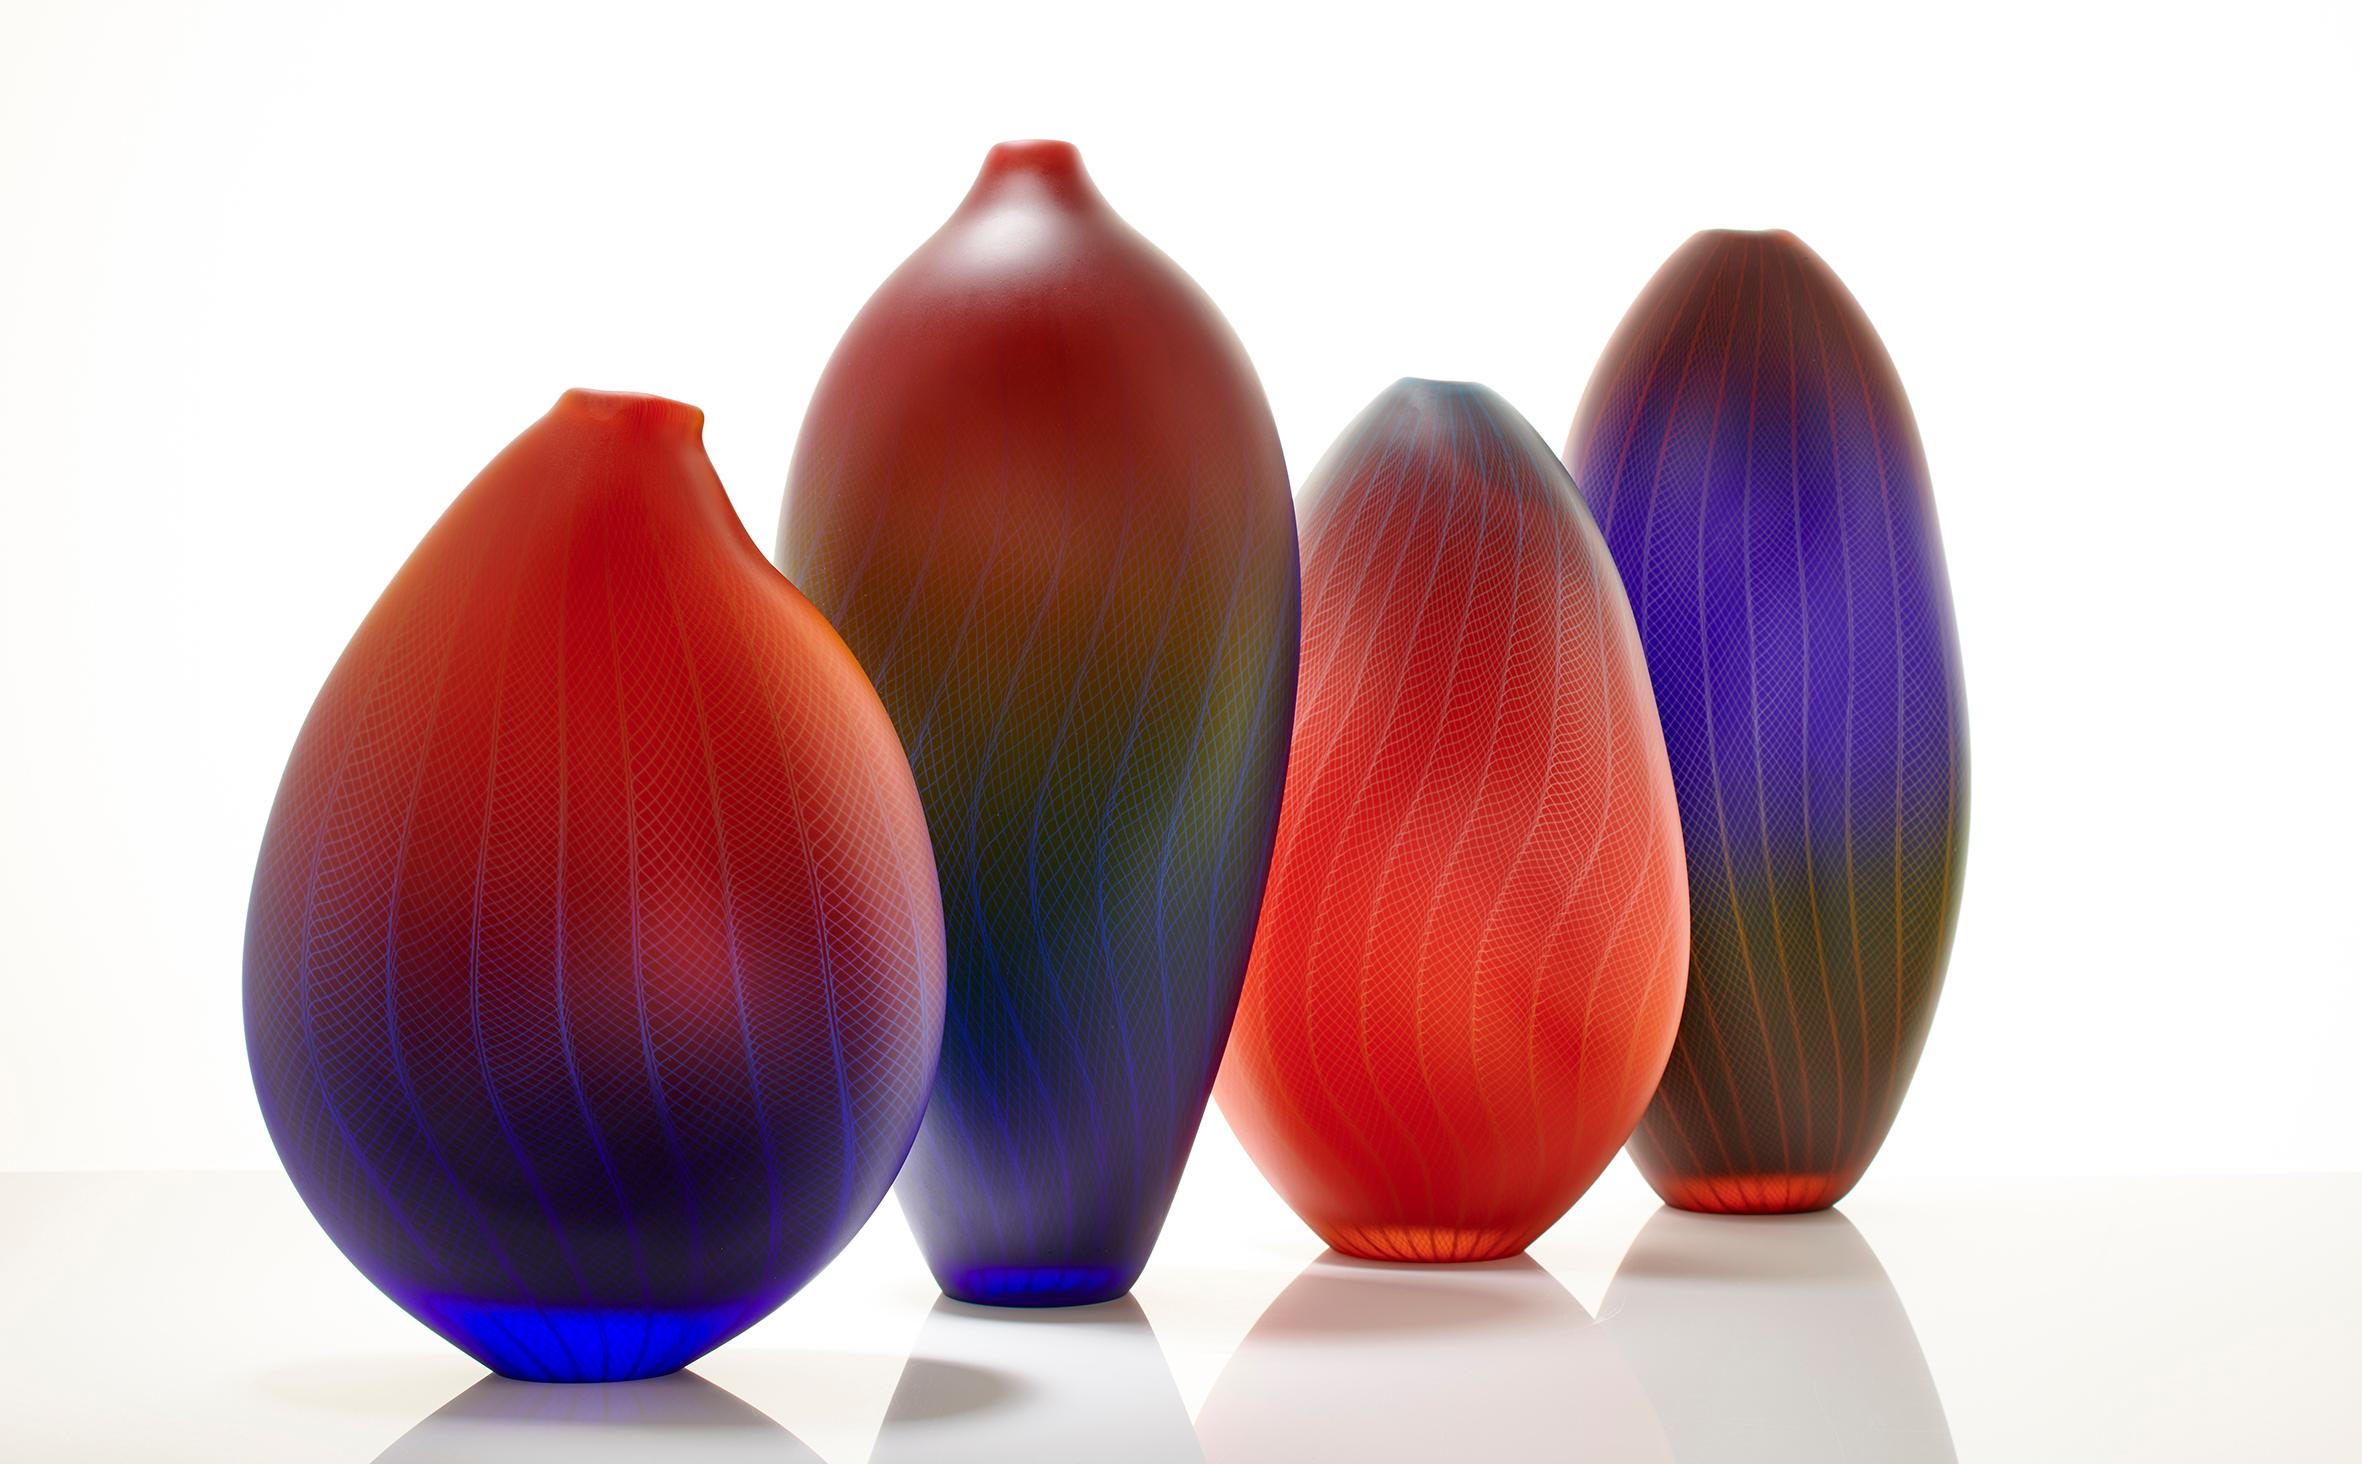 Contemporary Polychromatic Interleave 005, a unique glass vessel in red & blue by Liam Reeves For Sale